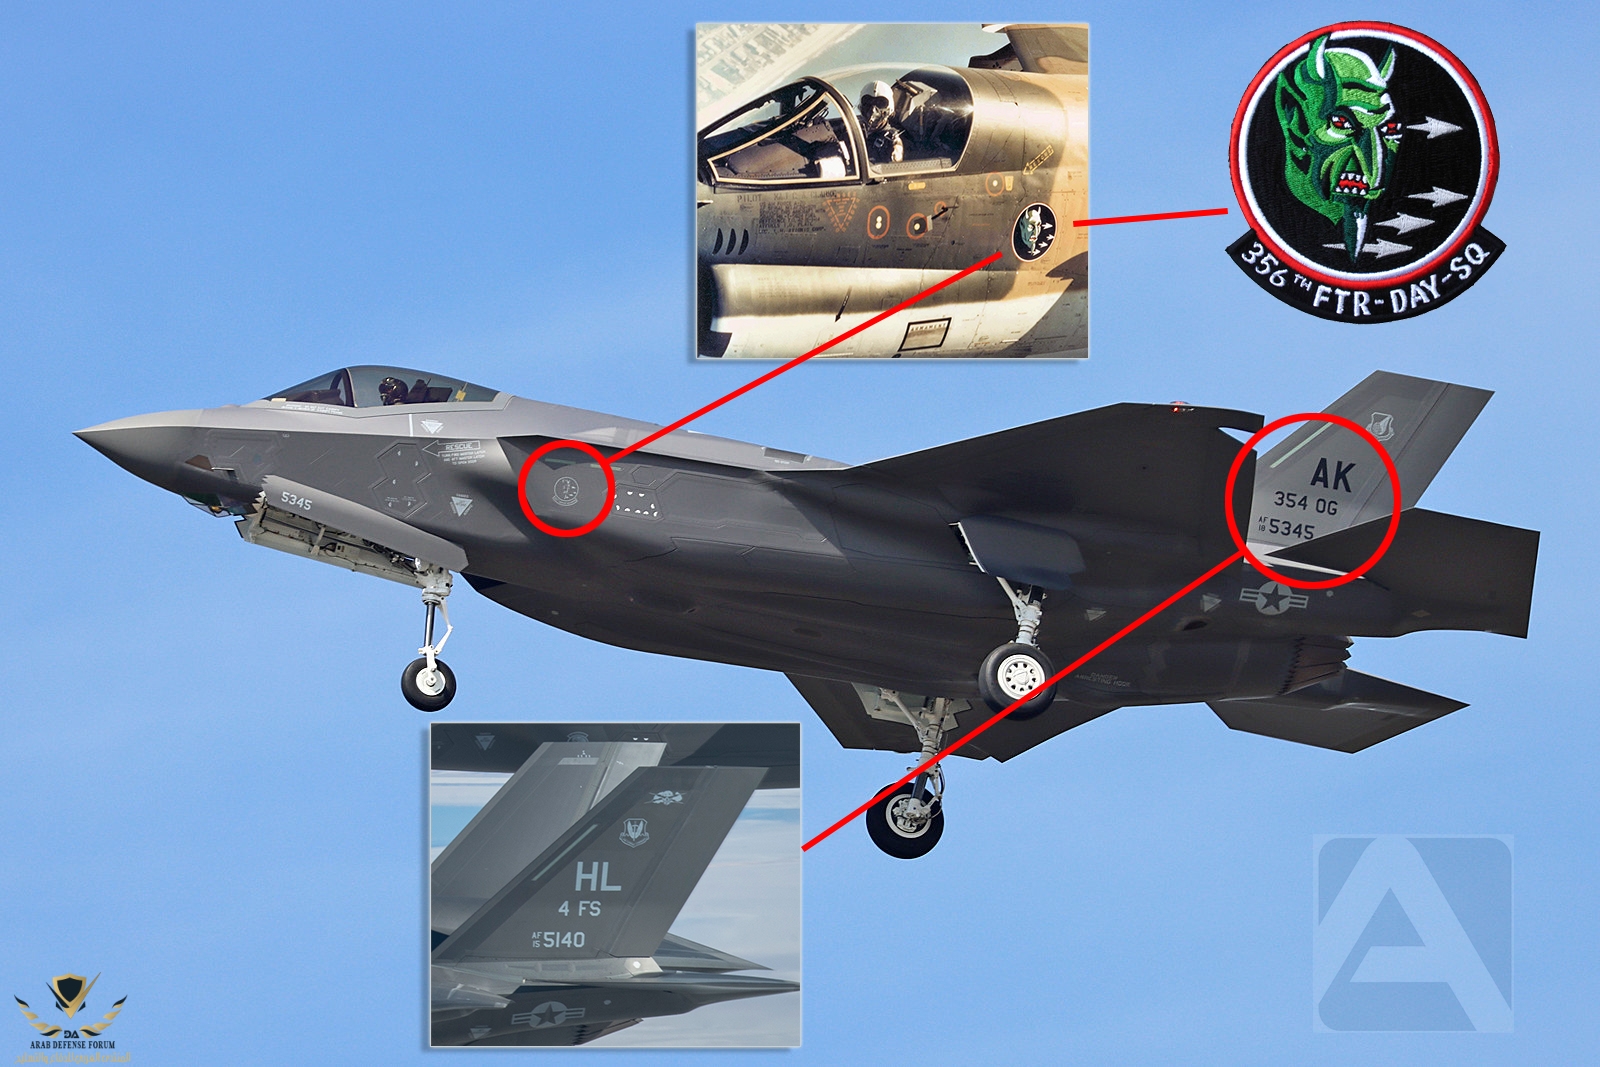 F-35-356th-patch-and-markings.jpg